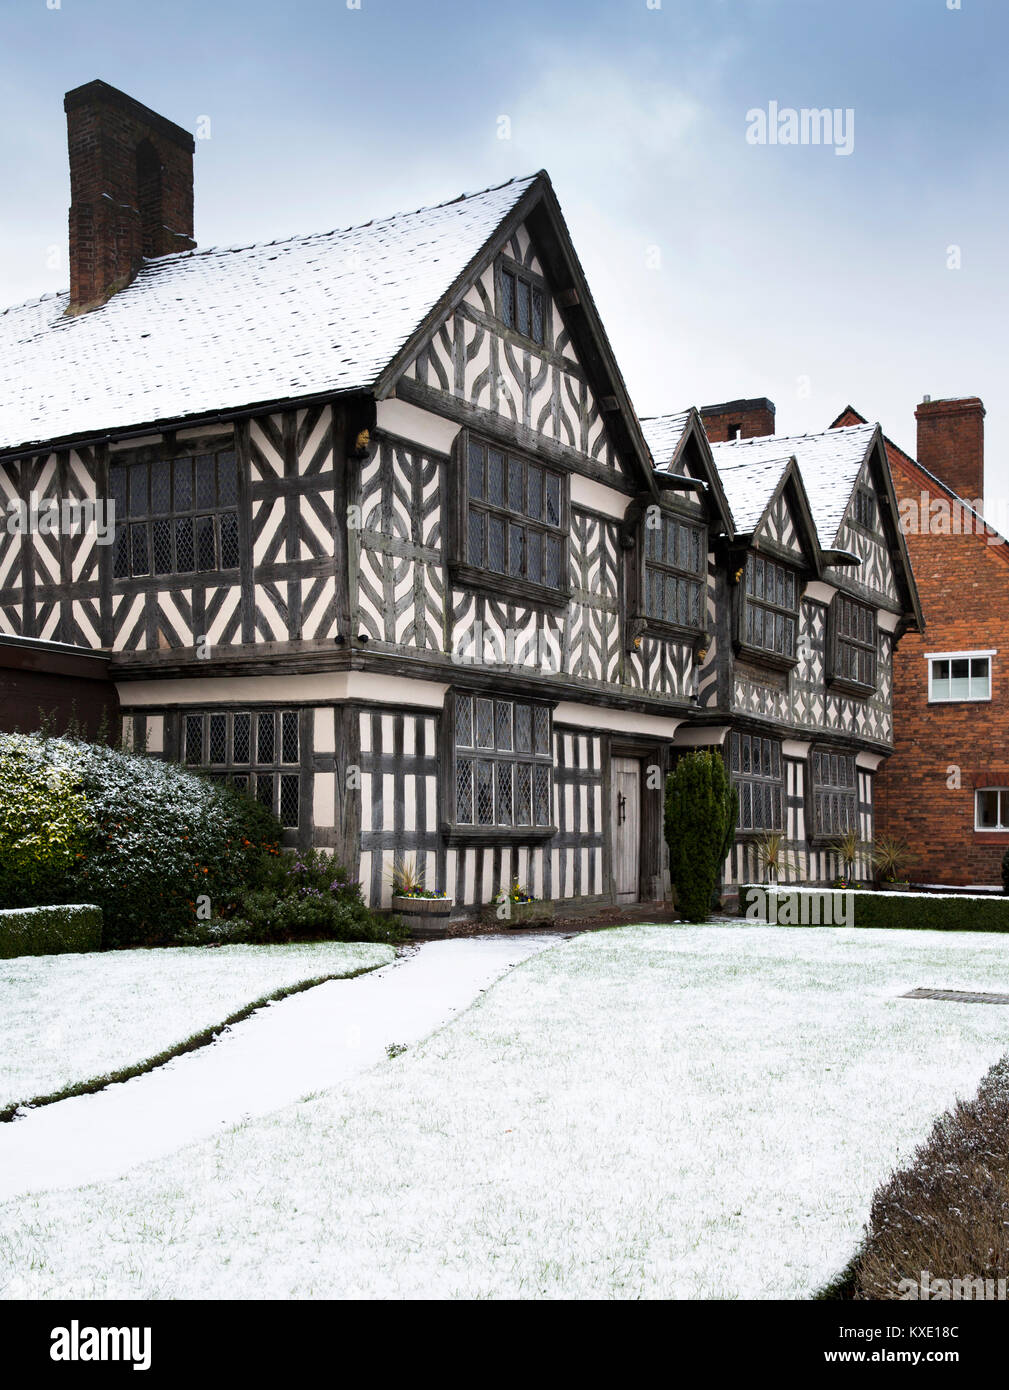 UK, England, Cheshire, Nantwich, London Road, 1577 Churches Mansion, one of the town’s oldest buildings in winter snow Stock Photo